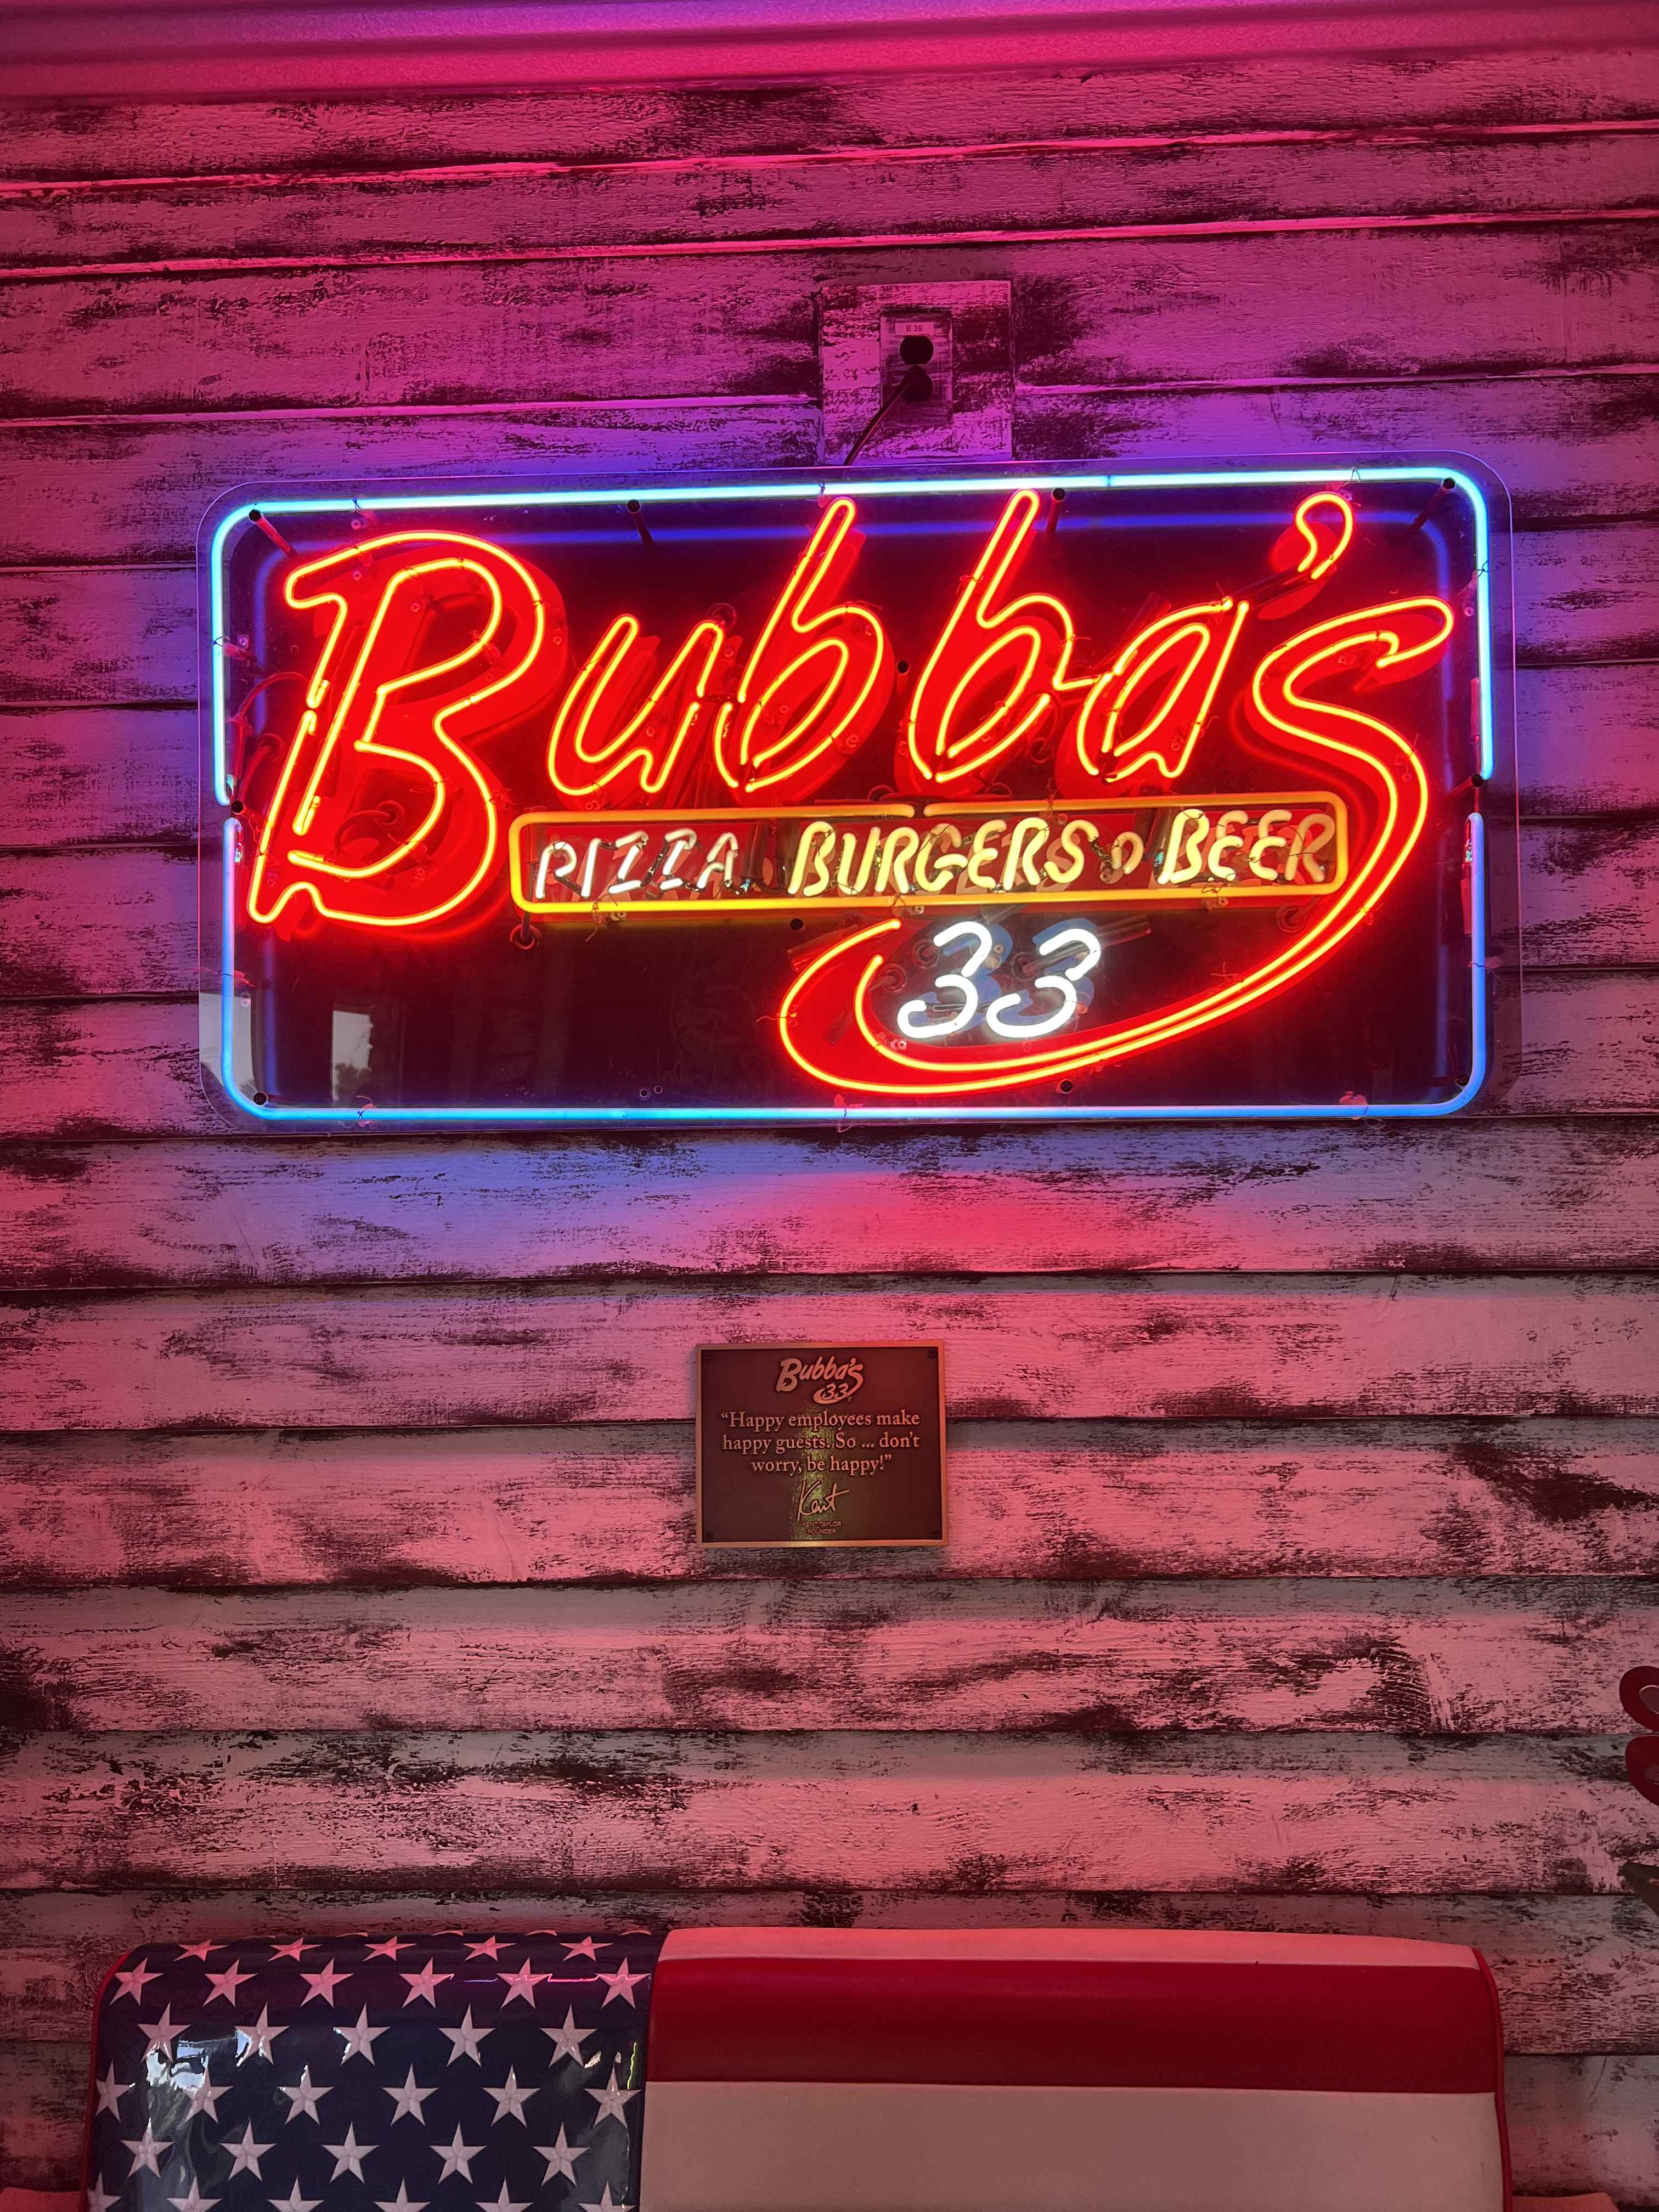 Neon Signs